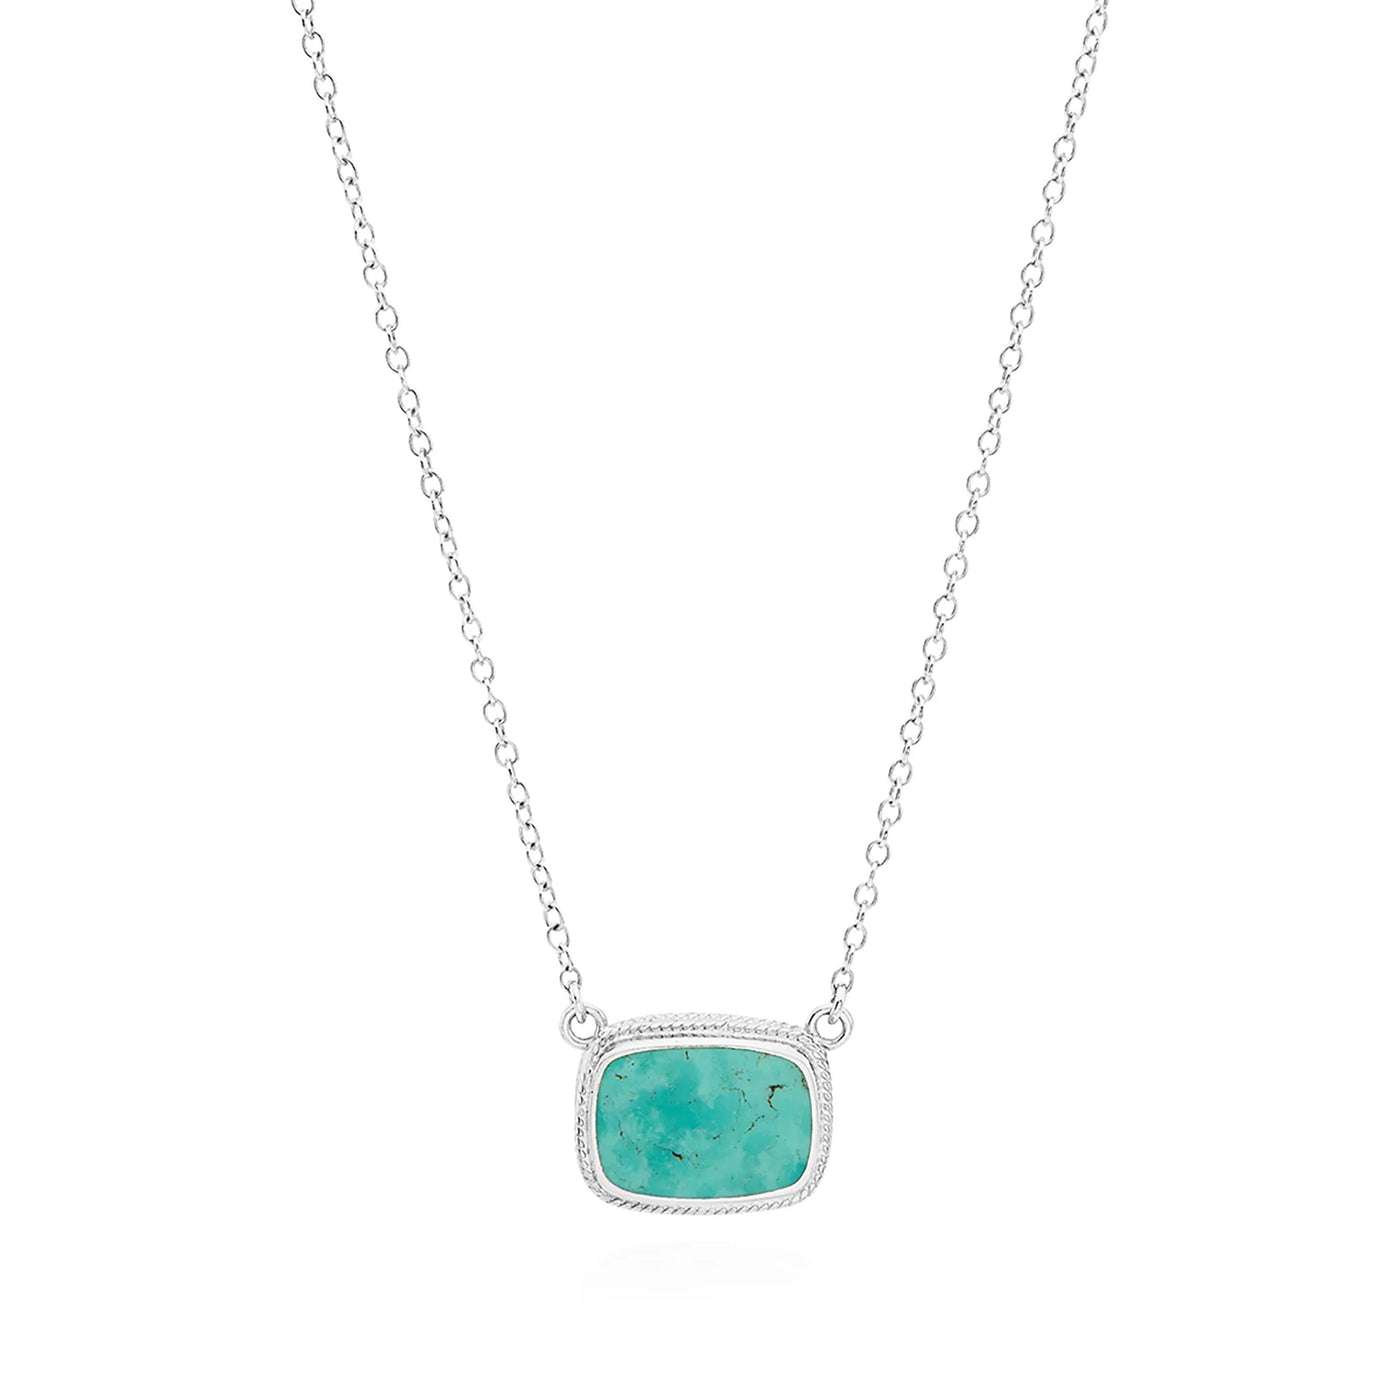 Anna Beck Medium Turquoise Cushion Necklace Silver